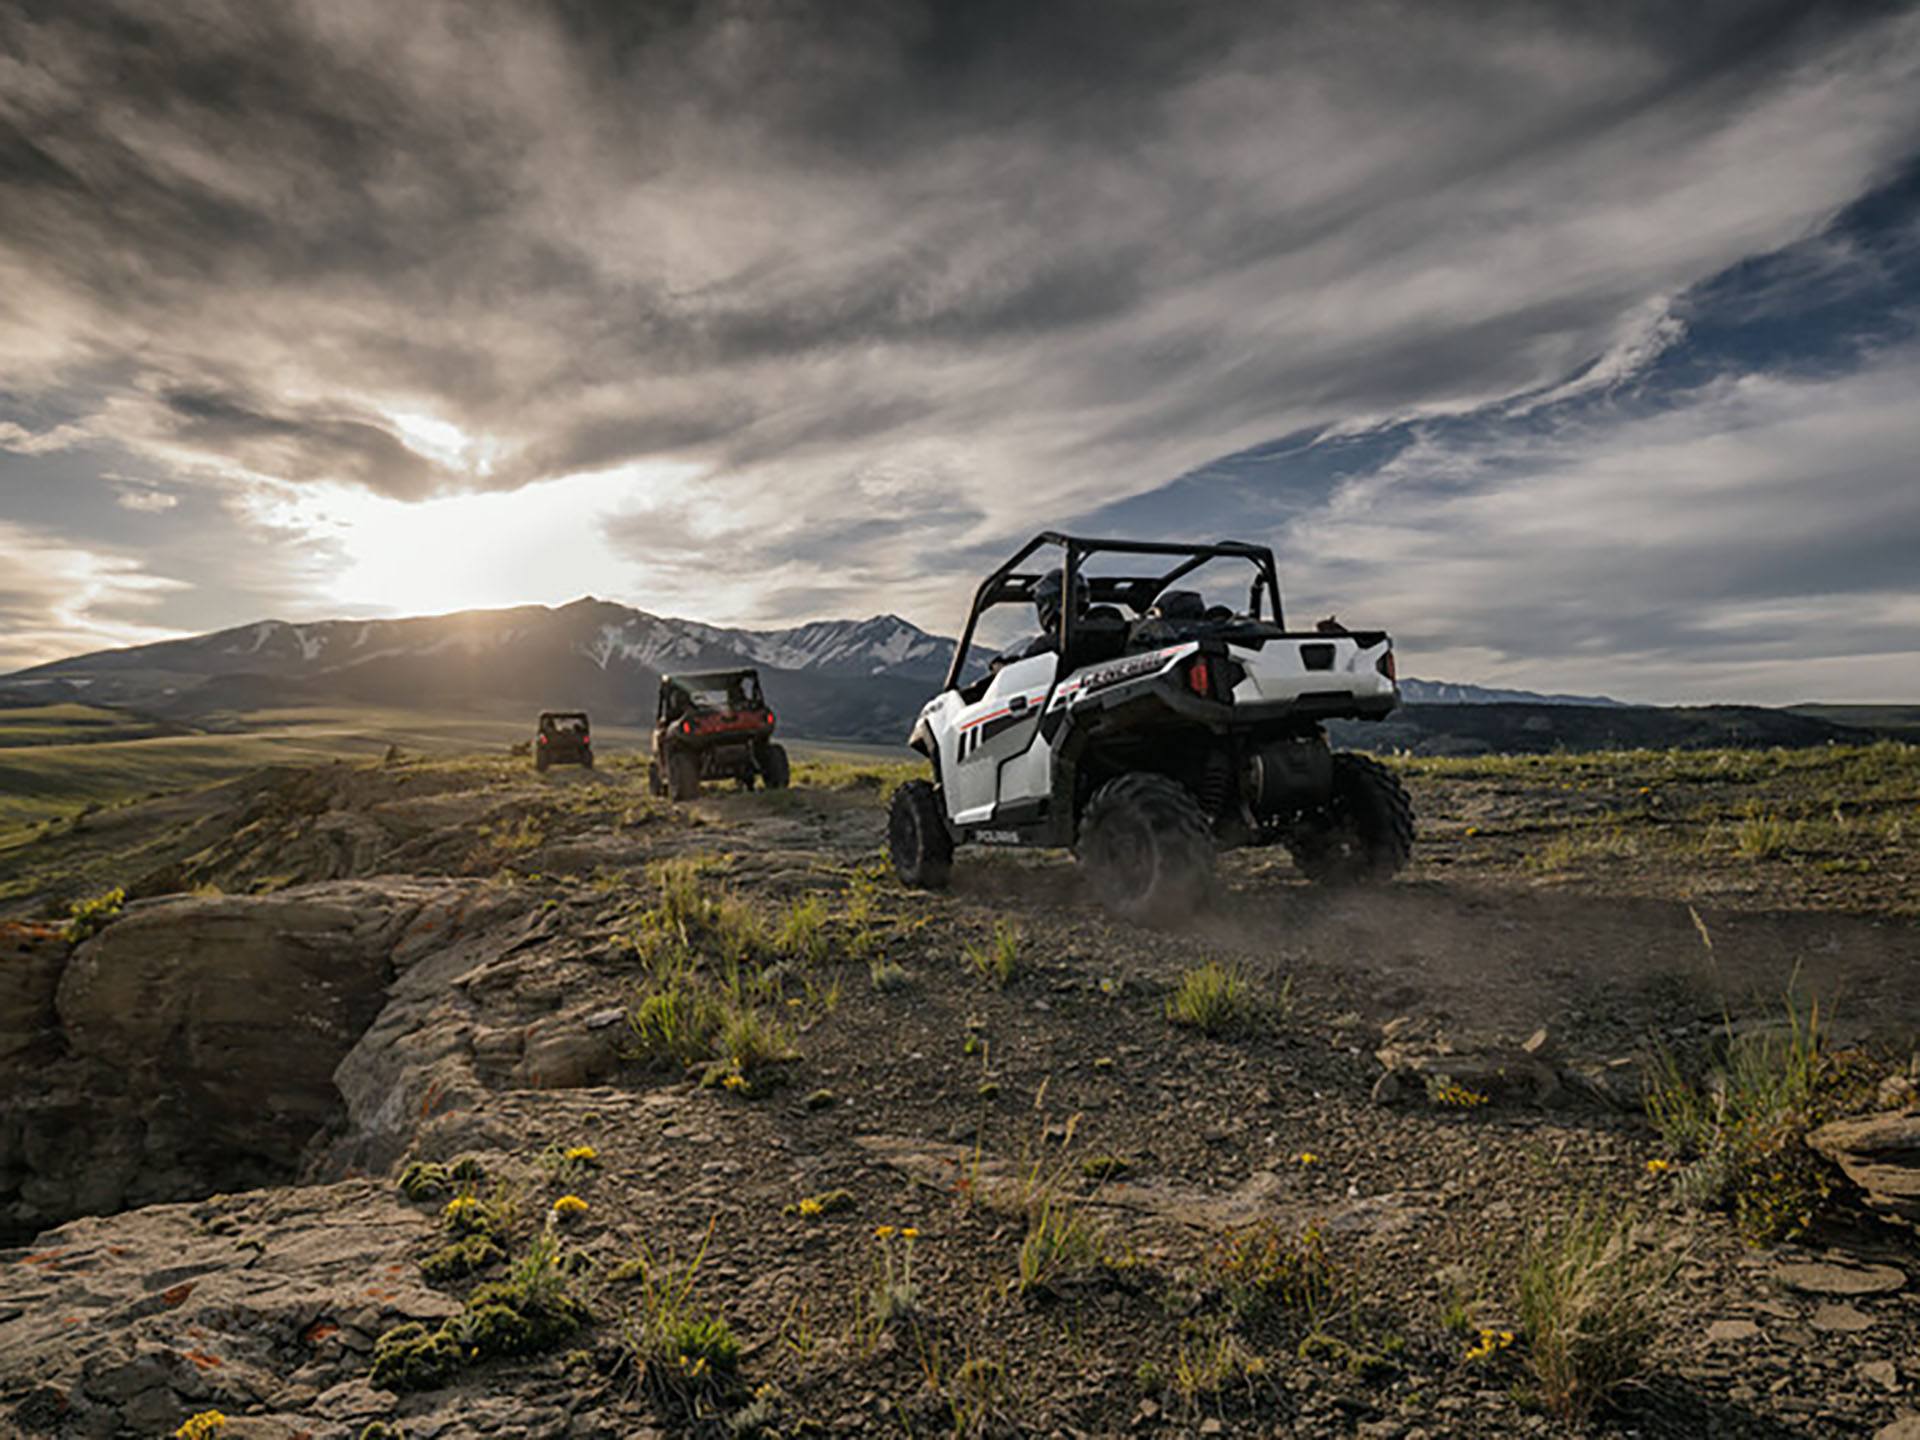 2023 Polaris General 1000 Sport in Clearwater, Florida - Photo 6